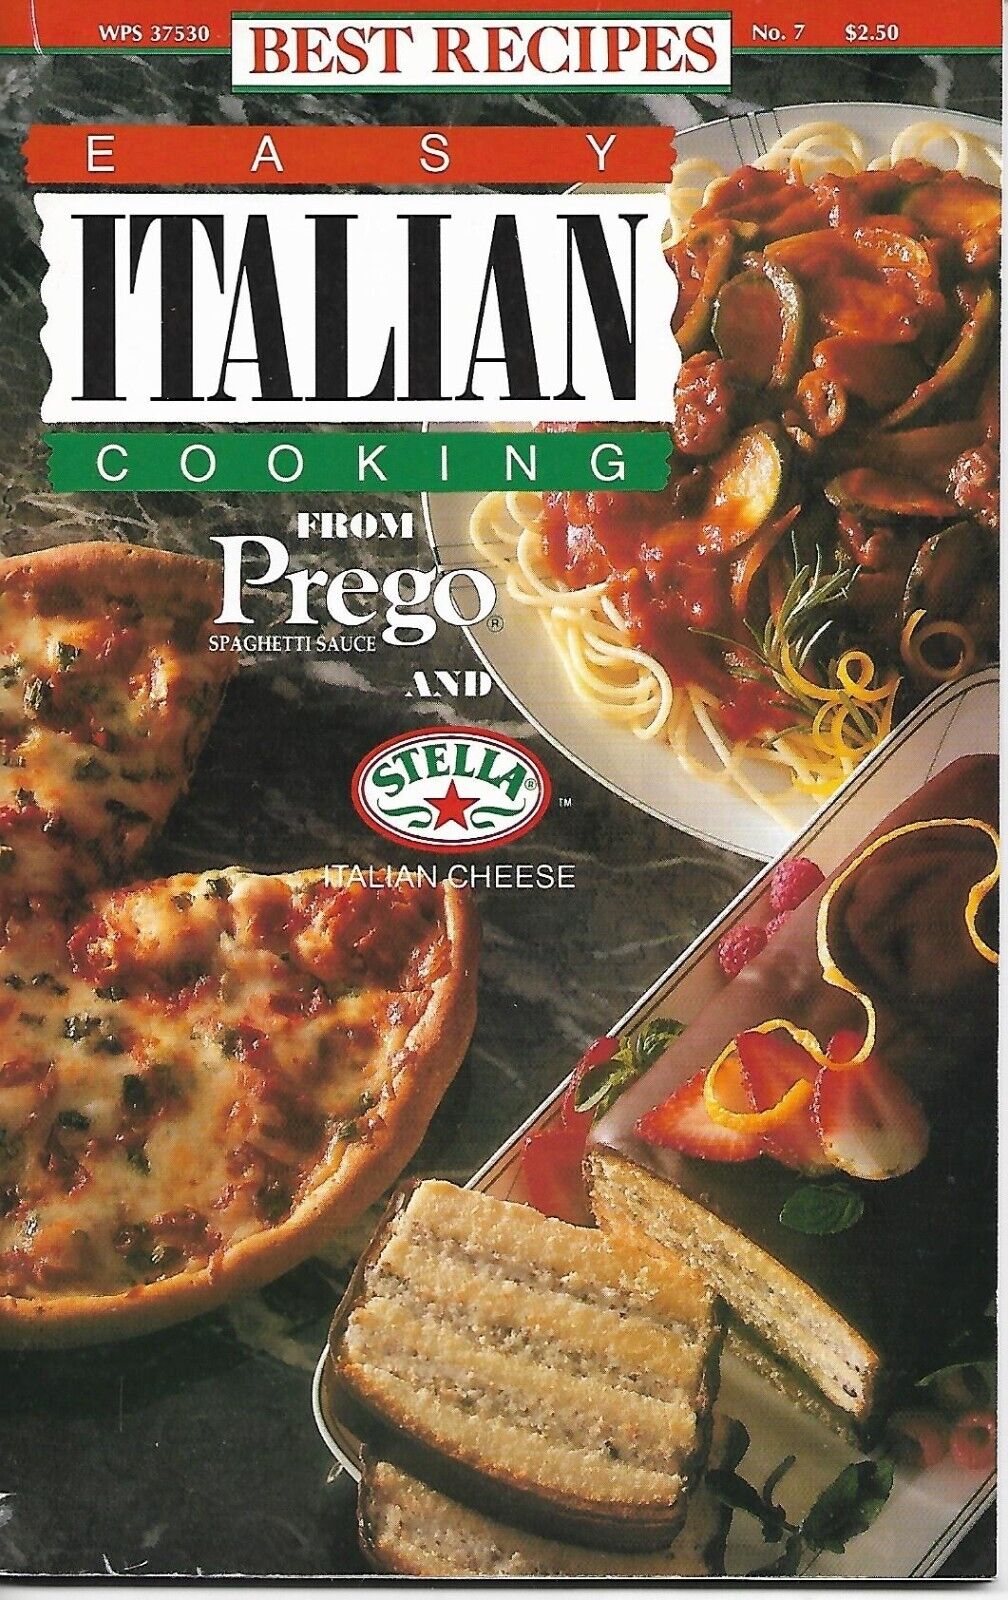 Best Recipes Easy Italian Cooking From Prego and Stella No. 7 September 1991